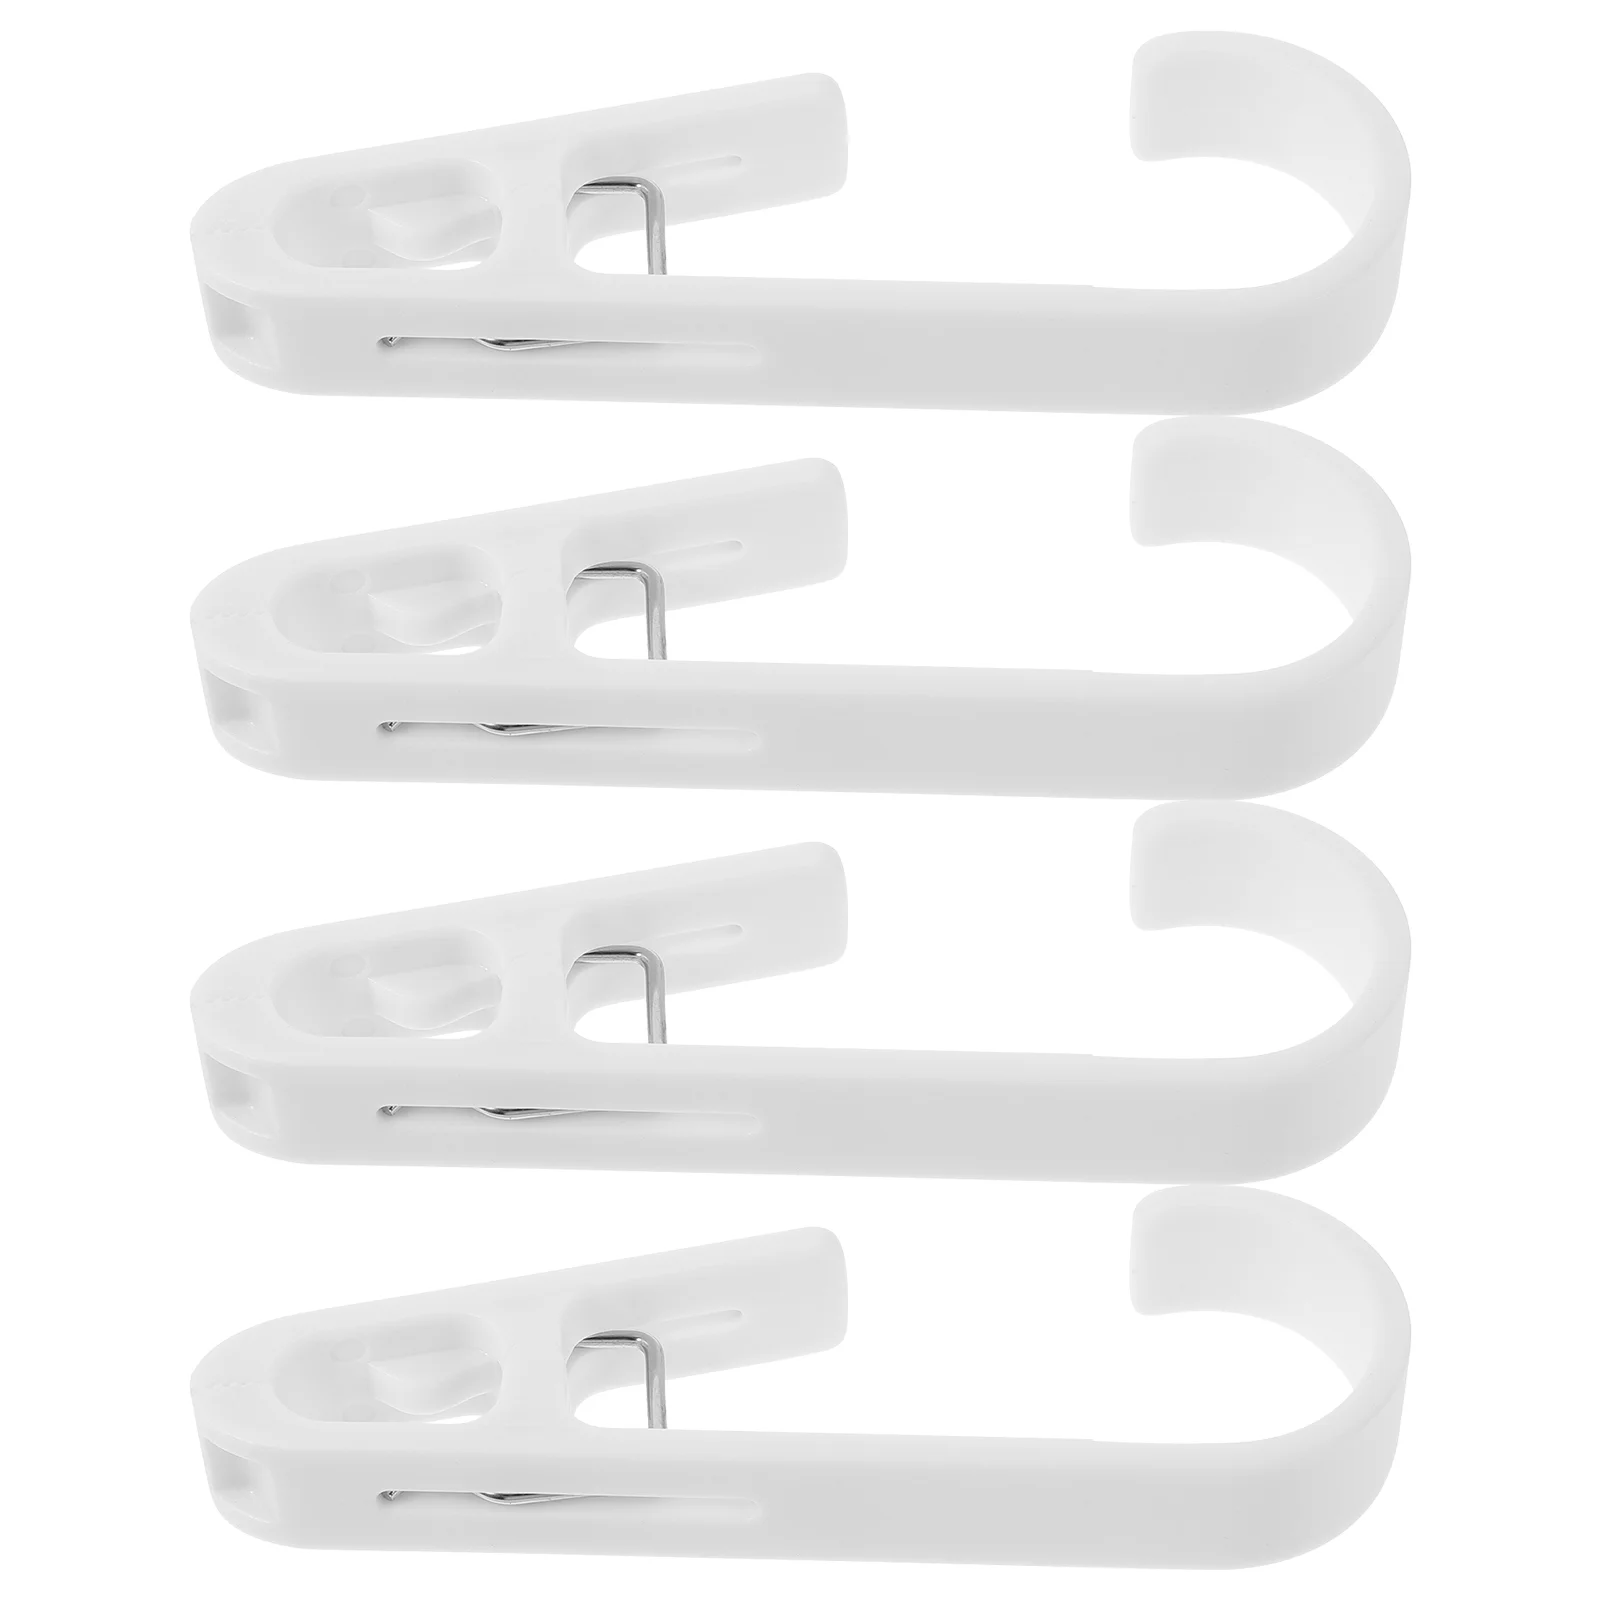 

4 Pcs Utility Clips Hangers For Closet Plastic Clothes Scarf Outdoor Drying Clamp Peg Hooks Adjustable Pants Clamps Rack